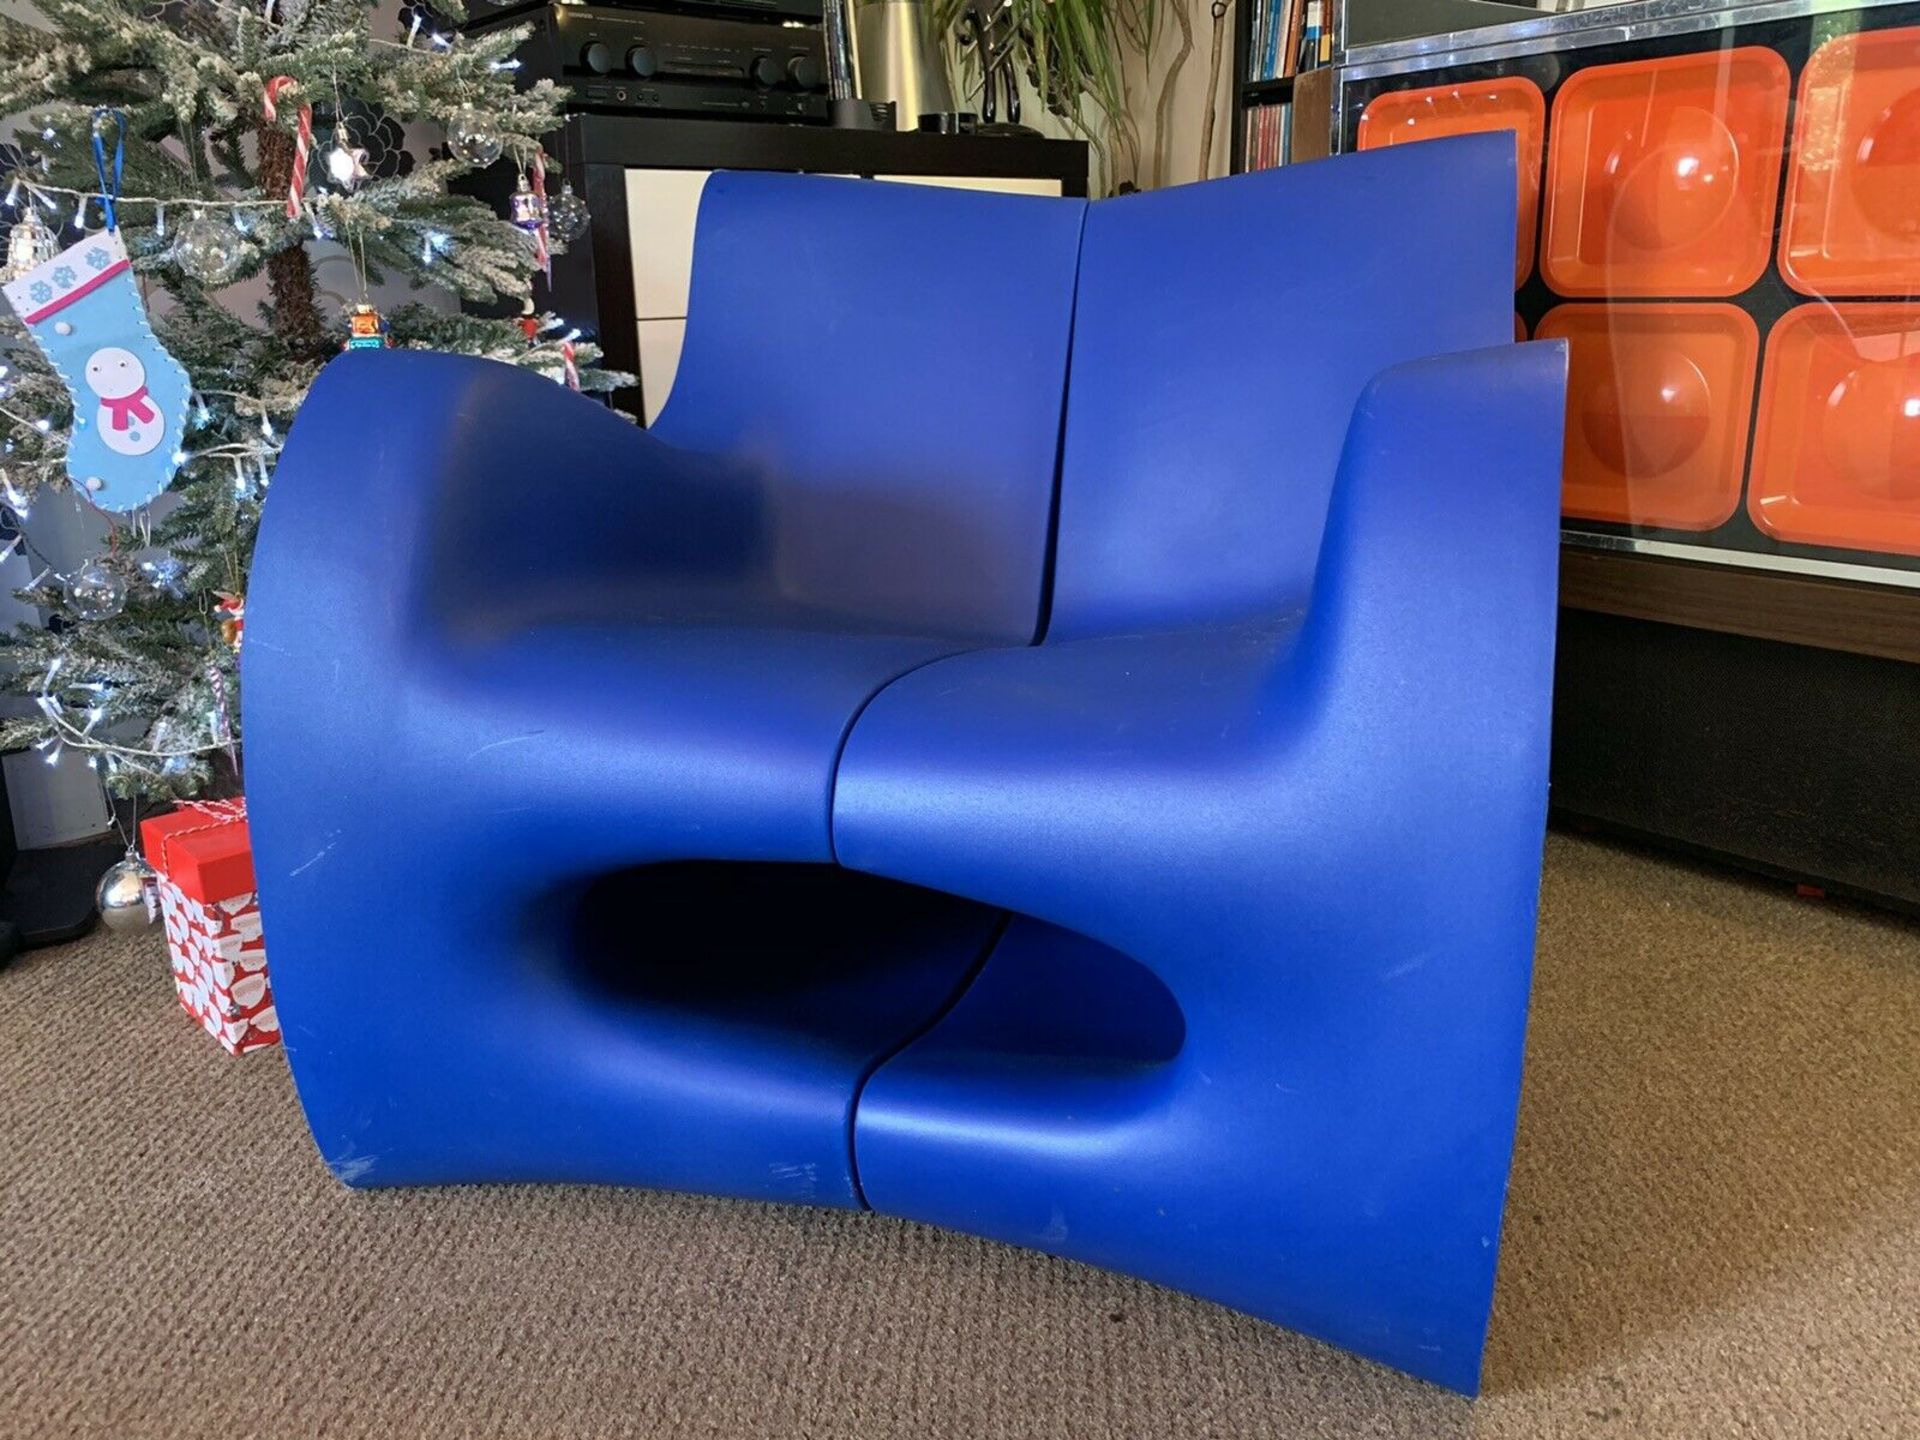 Canyon Chair Blue A Unique And Rare Off Rotation Moulded Indoor/Outdoor Chair Designed And Made